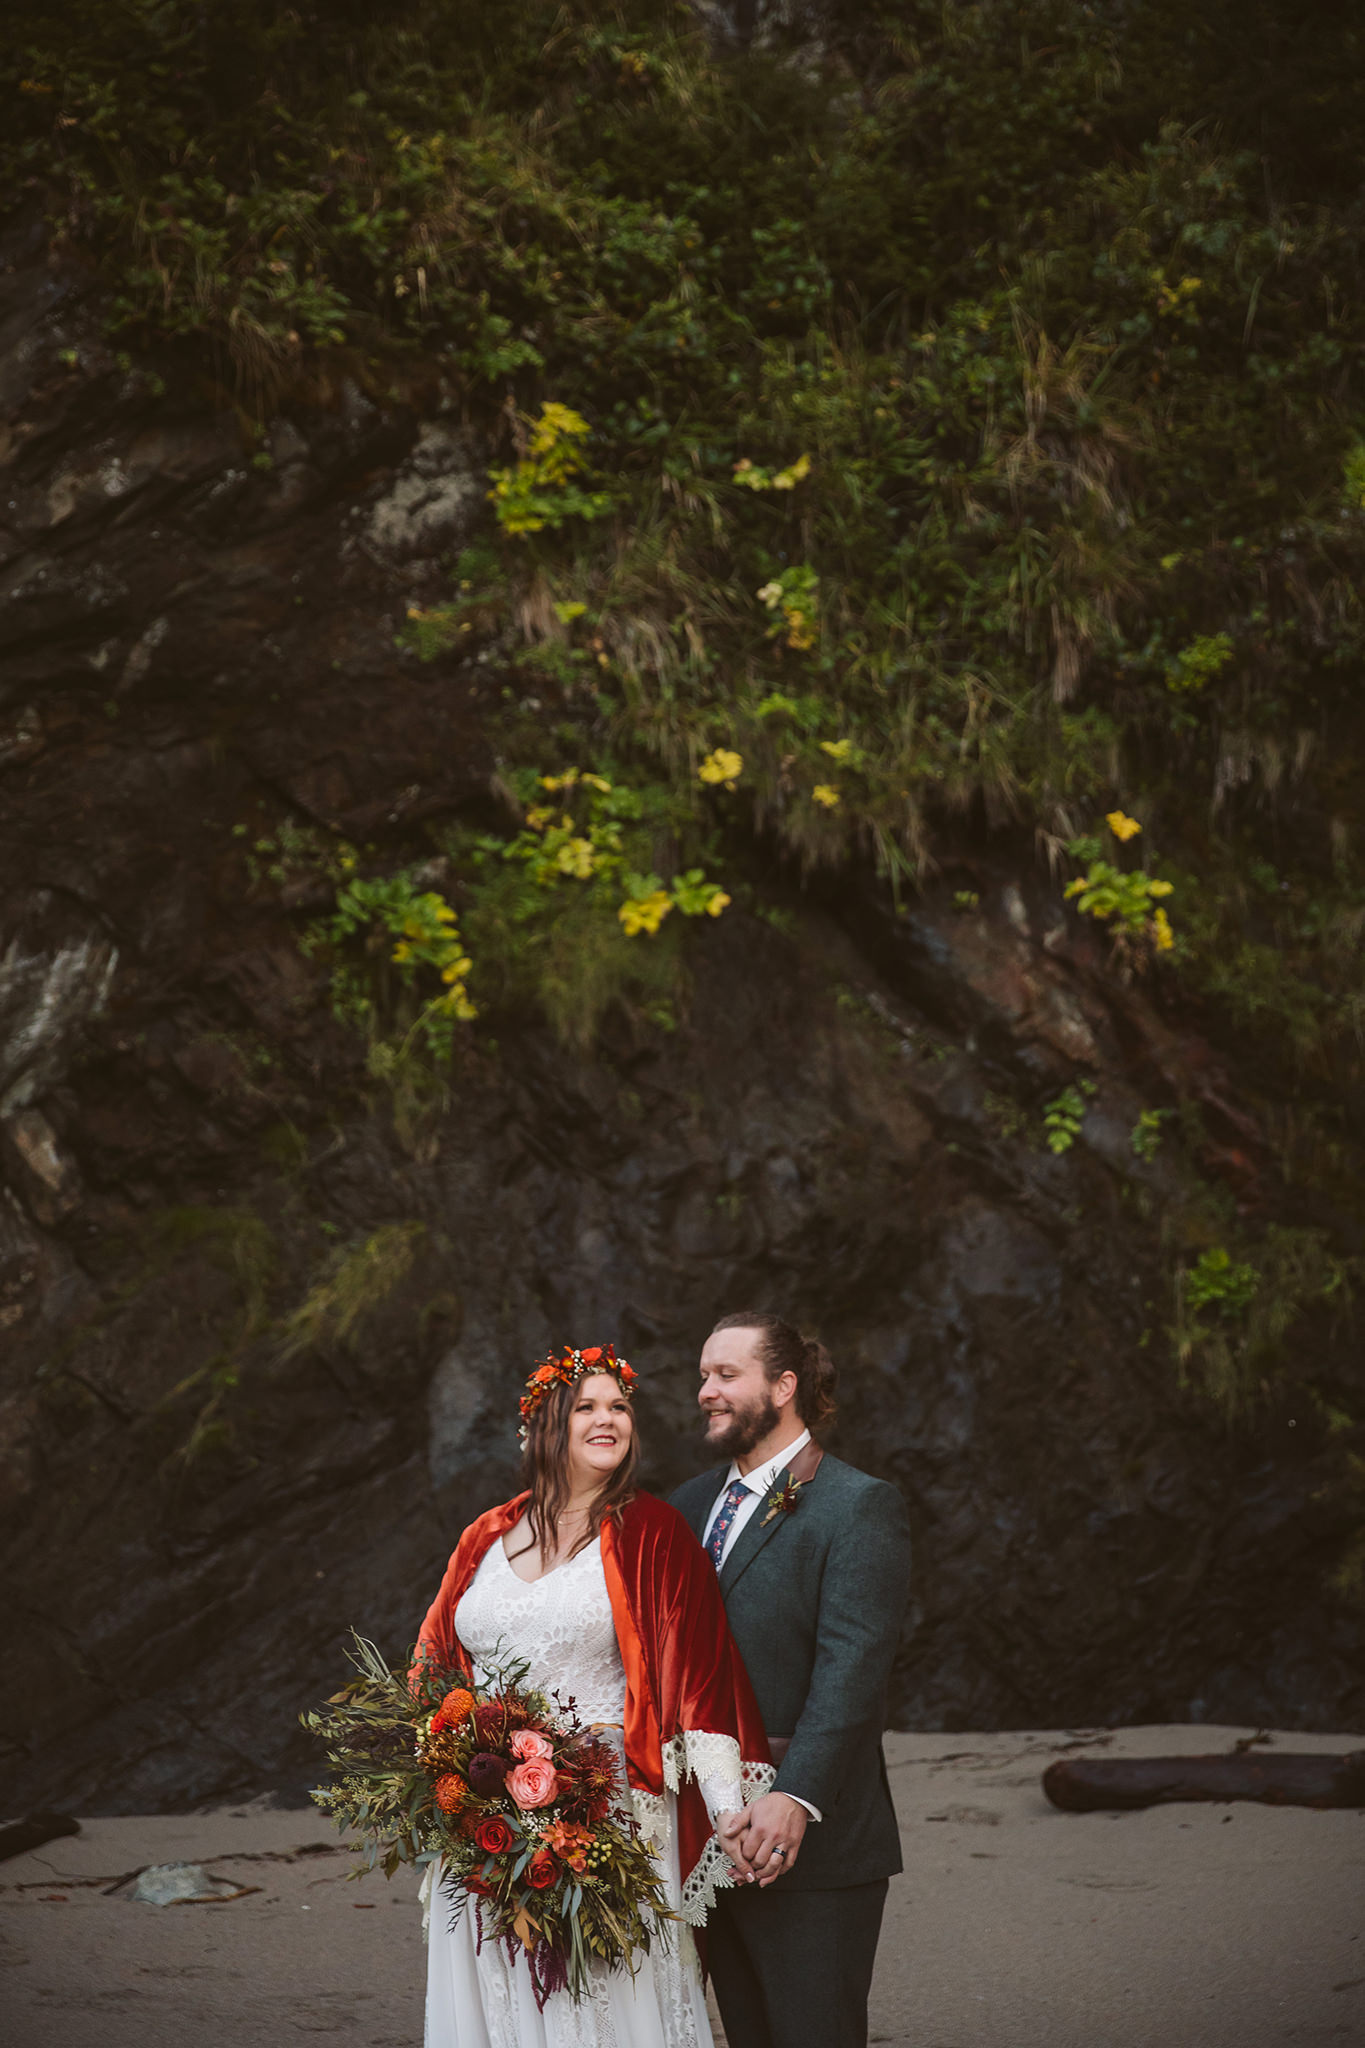 A wedding portrait of a bride and groom on the beach with a moss covered rock wall in the background